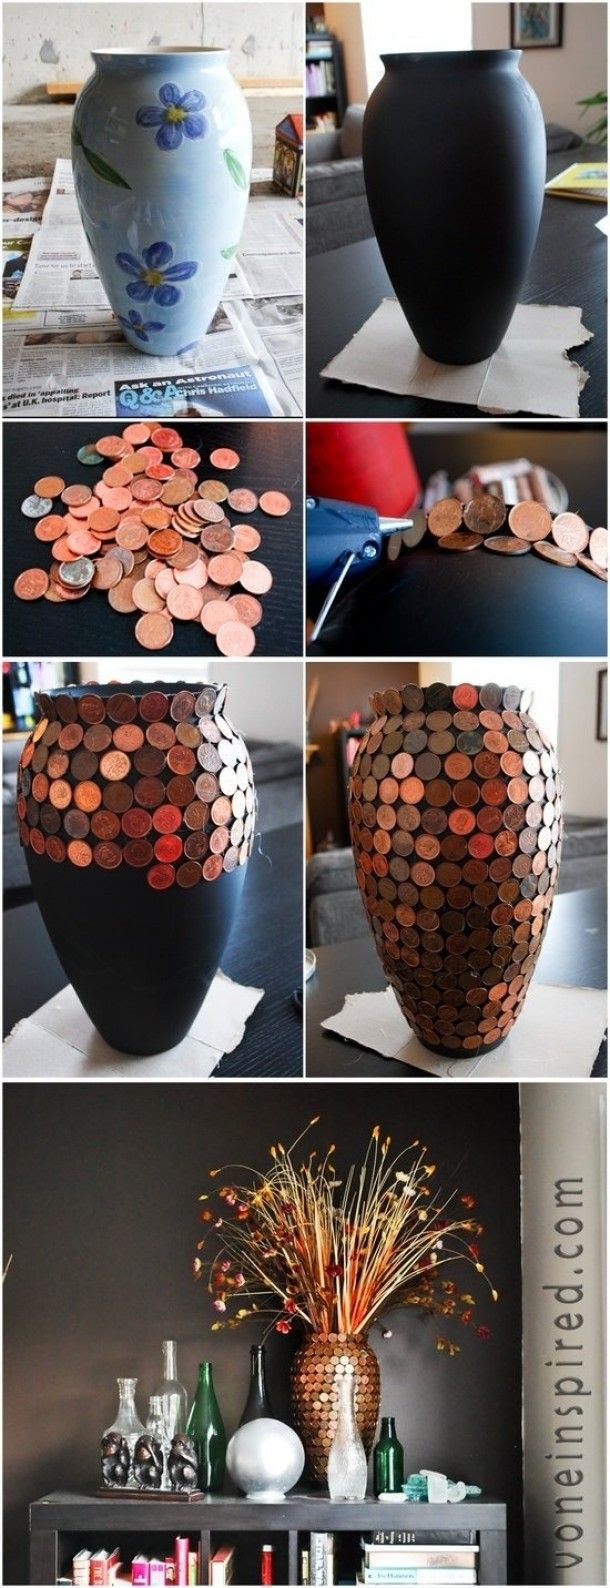 cheap vase with a roll or two of pennies. Mismatching buttons or metal dipped in gold/bronze color would look really nice as well!